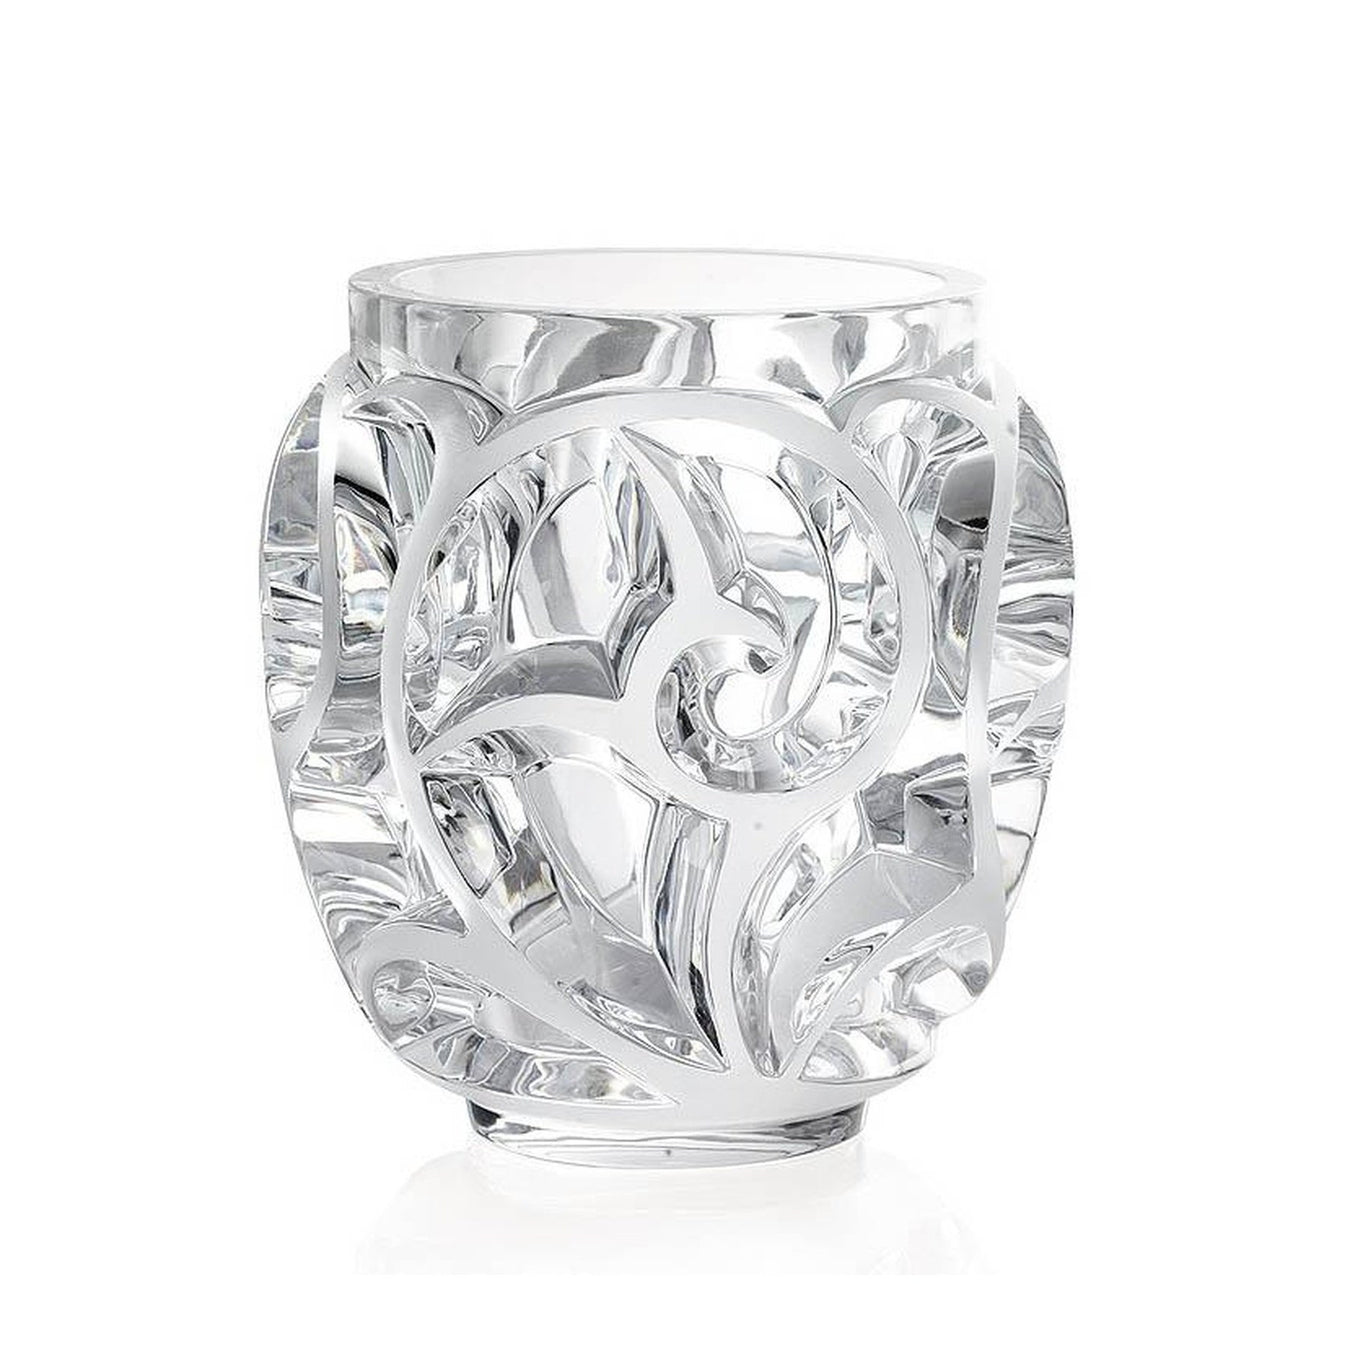 All Lalique Products